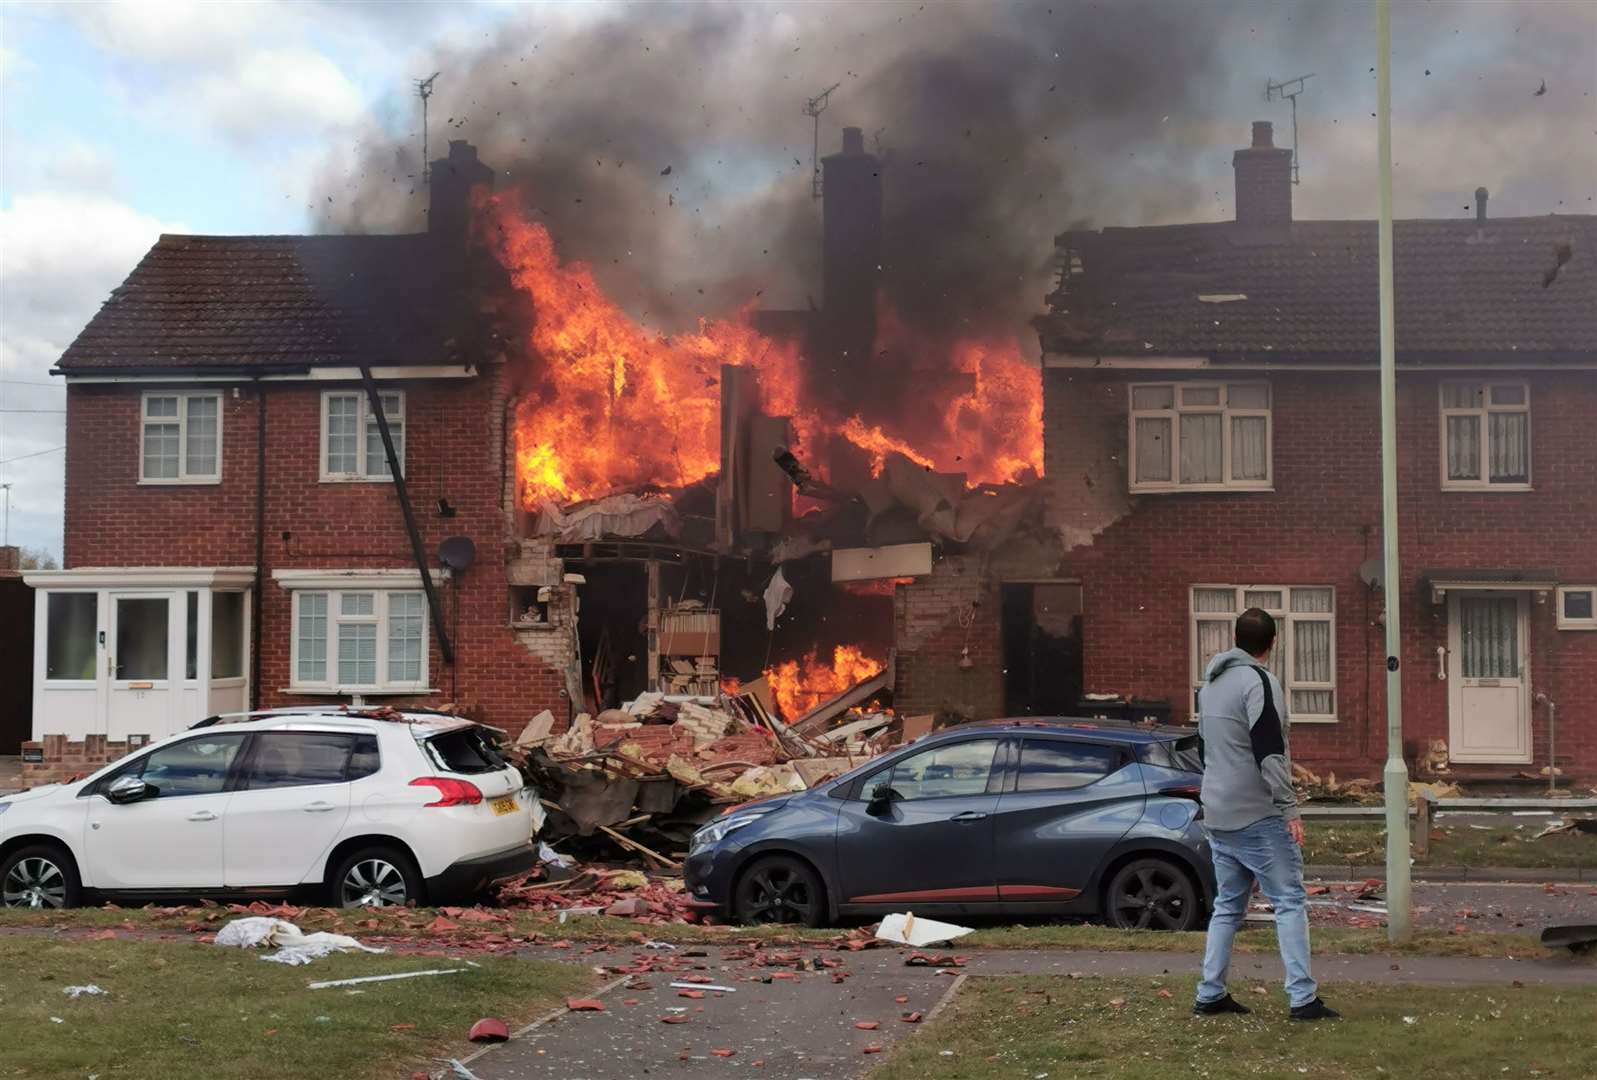 Tuesday's explosion left a home completely raized to the ground and two people with serious injuries